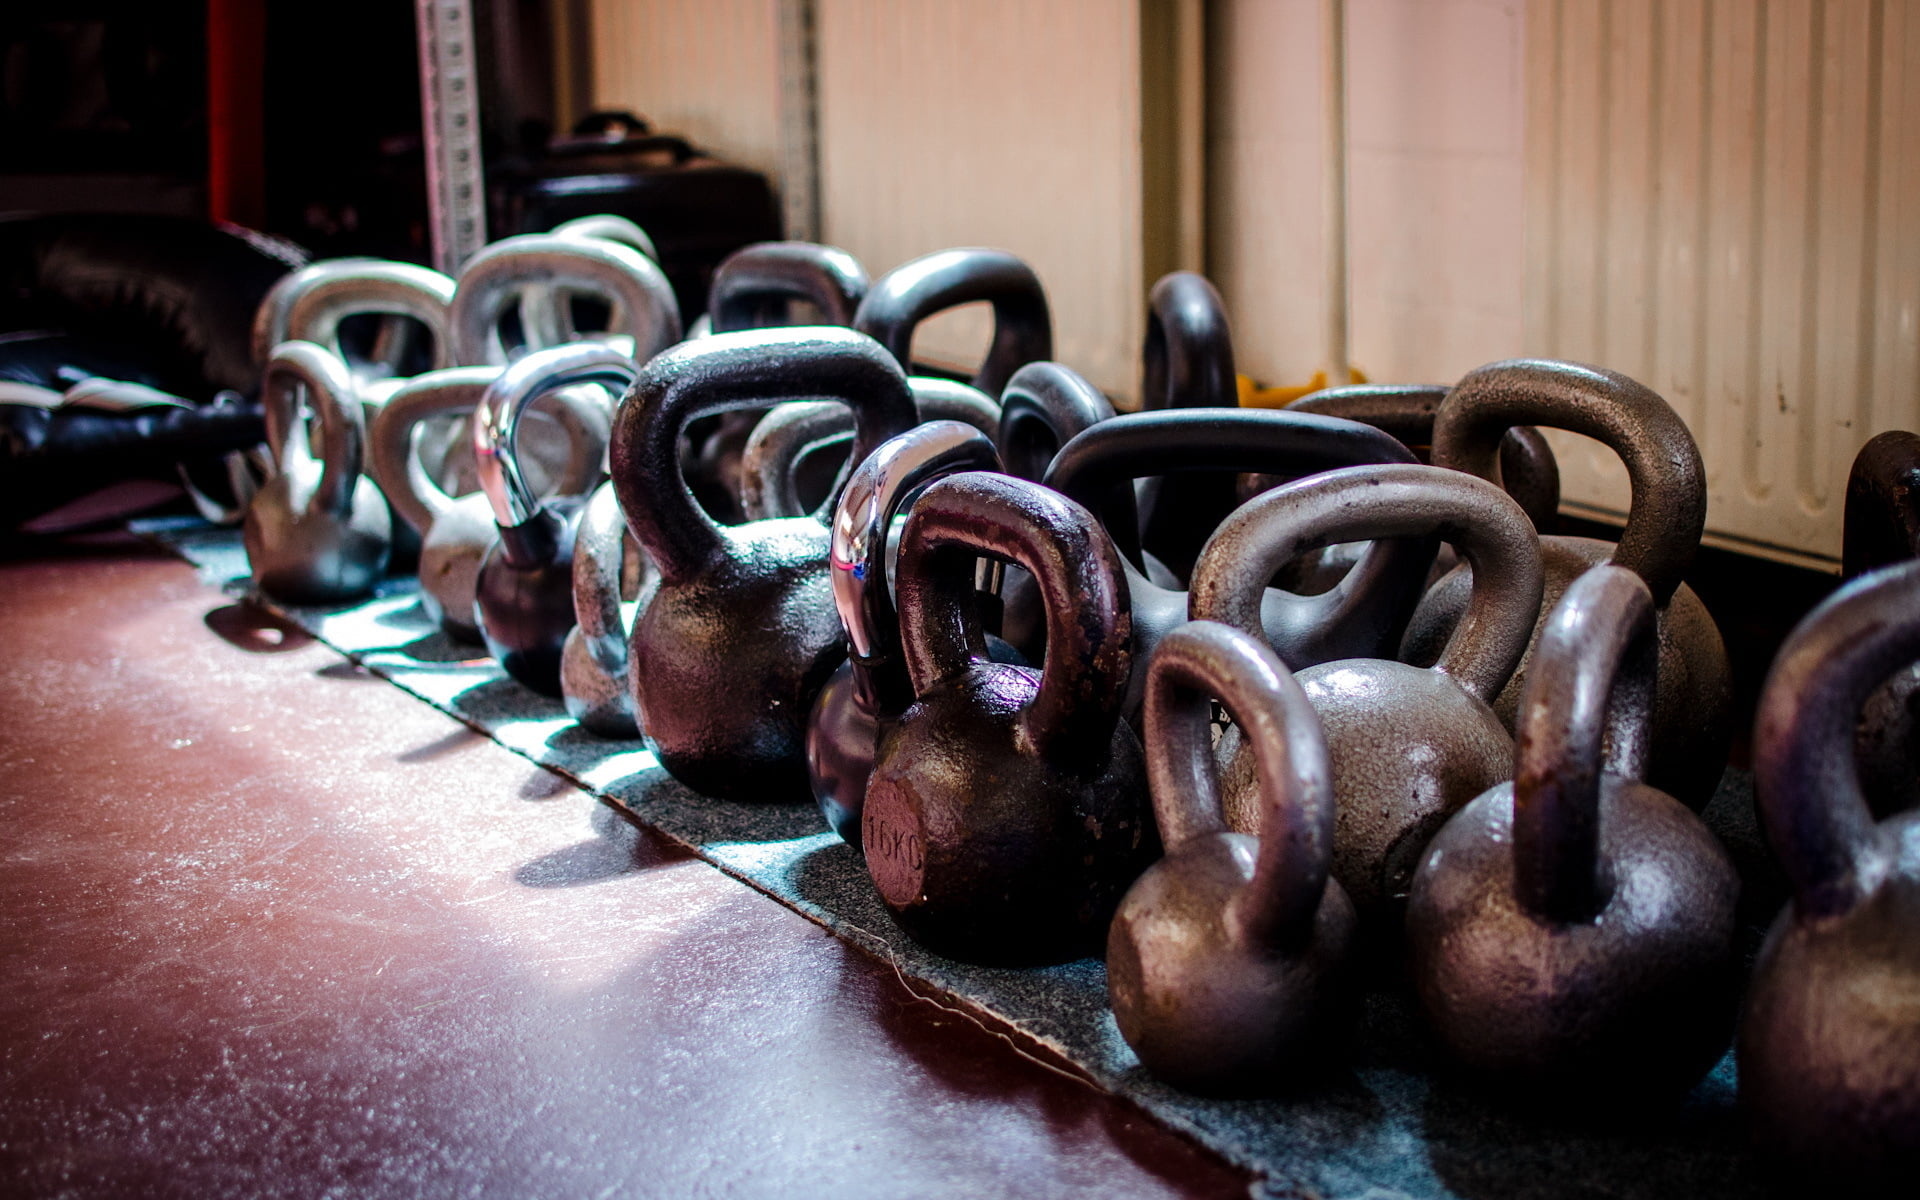 CrossFit: Bench kettlebell, Home gym, Fitness equipment, Weights, 16 kg, Muscle Growth. 1920x1200 HD Wallpaper.